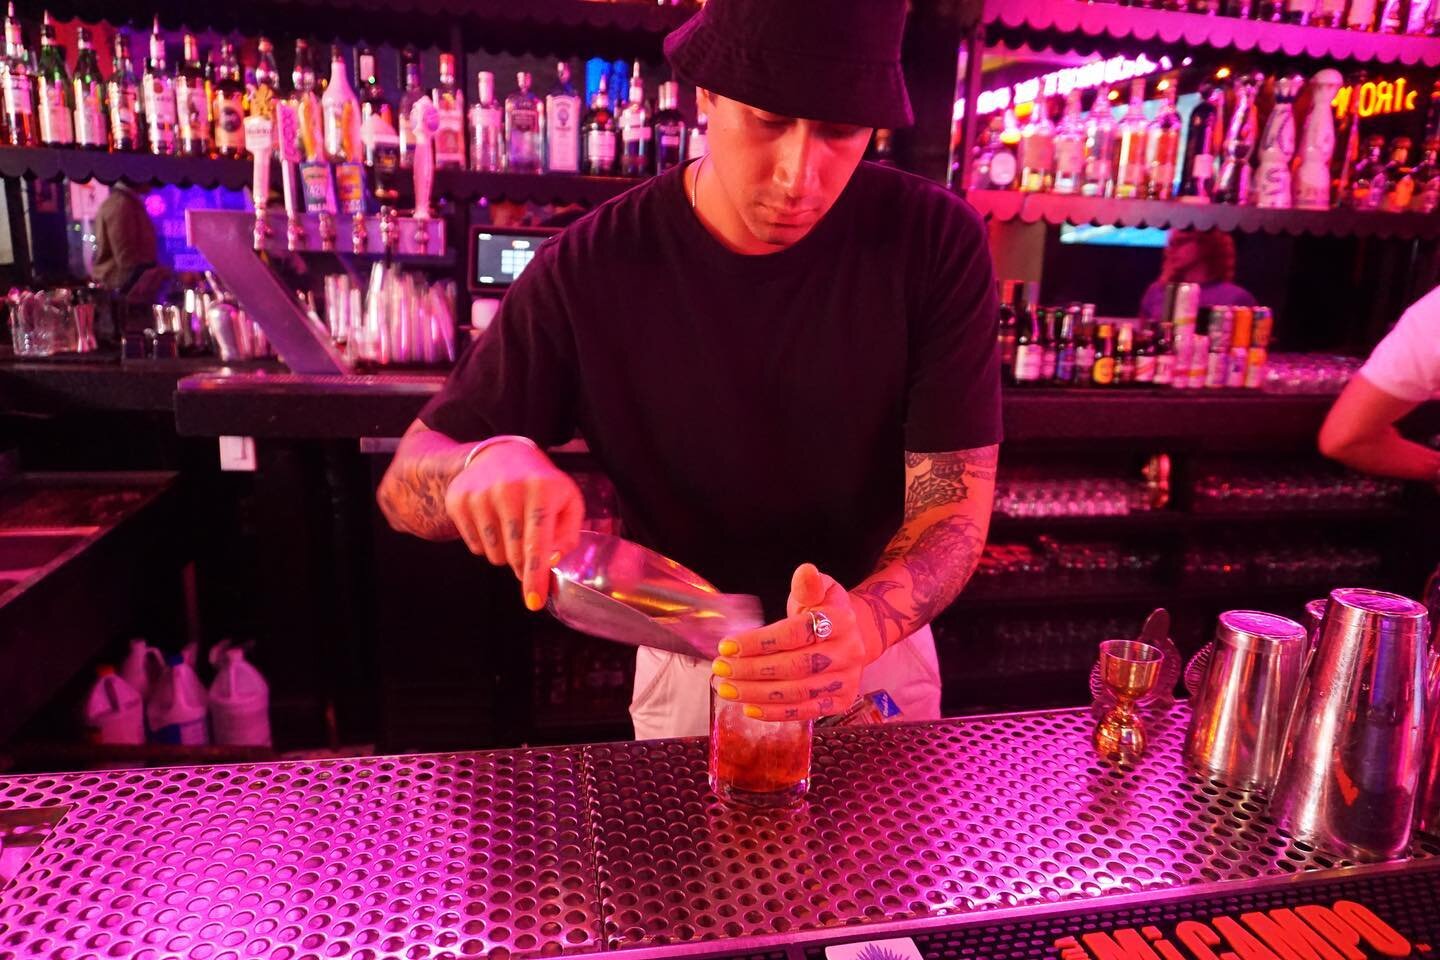 There&rsquo;s always a spot open for you at the bar! Our bartender Ed is ready to treat you to a cocktail or two&hellip; or 10?!

#bar #dowtownla #nightlife #nightcap #coctails #bartender #dtla #historiccore #mondayfunday